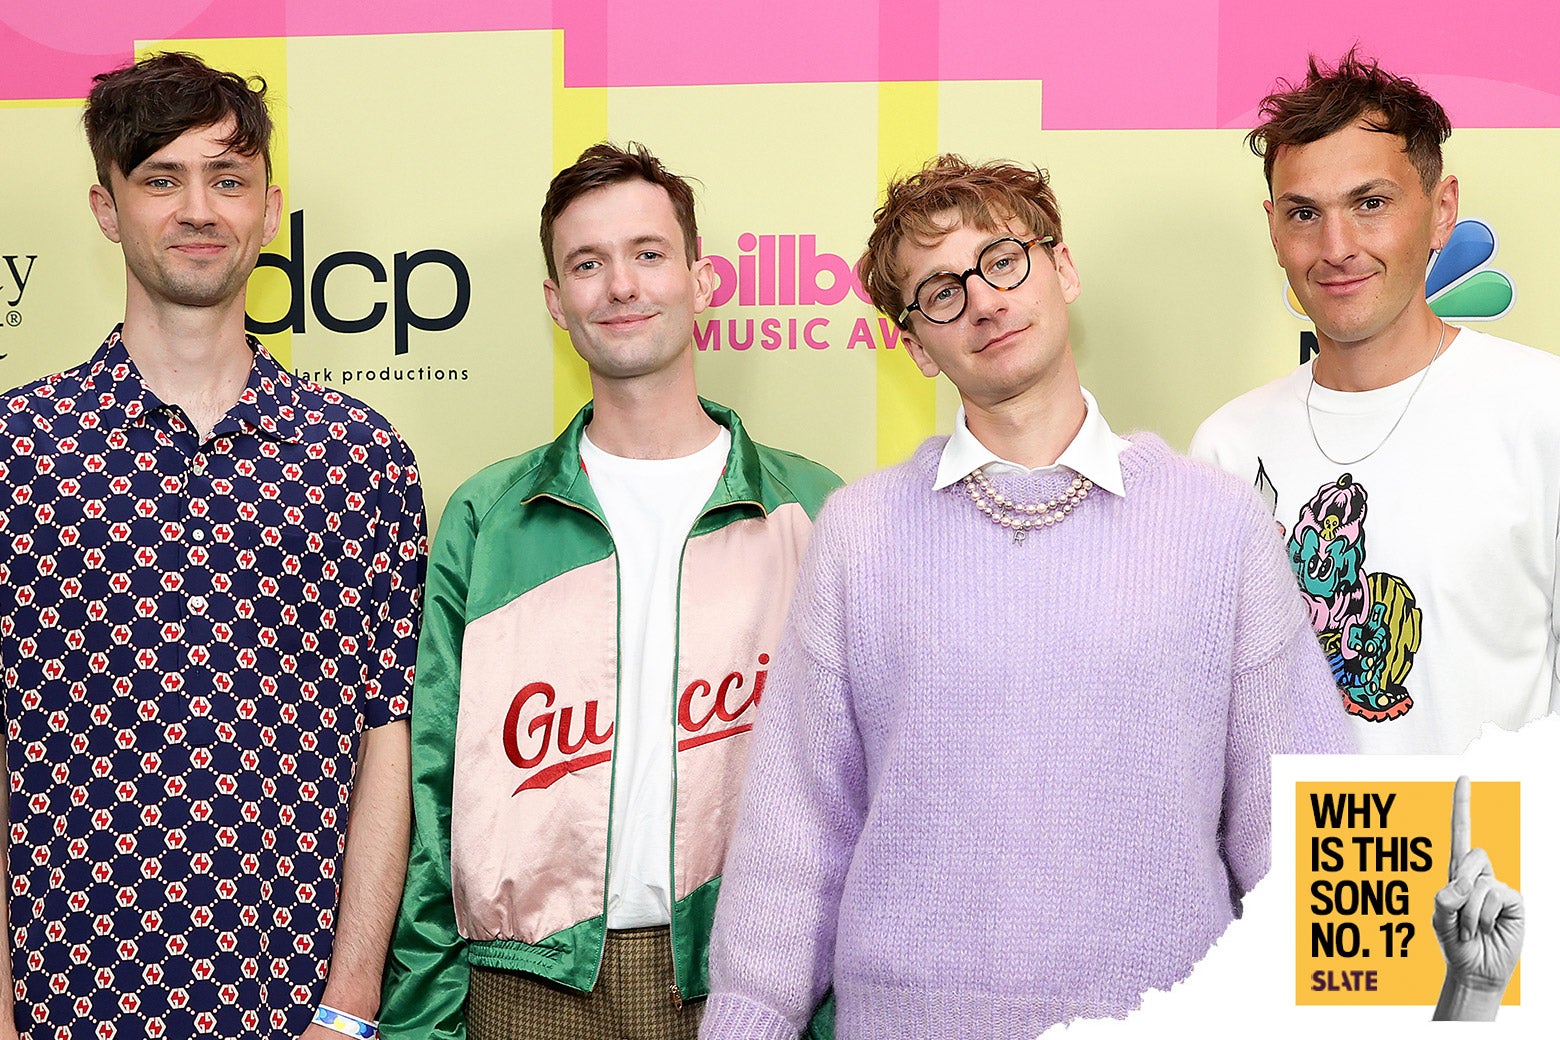 Heat Waves” by Glass Animals: The story of the No. 1 song that beat Encanto.